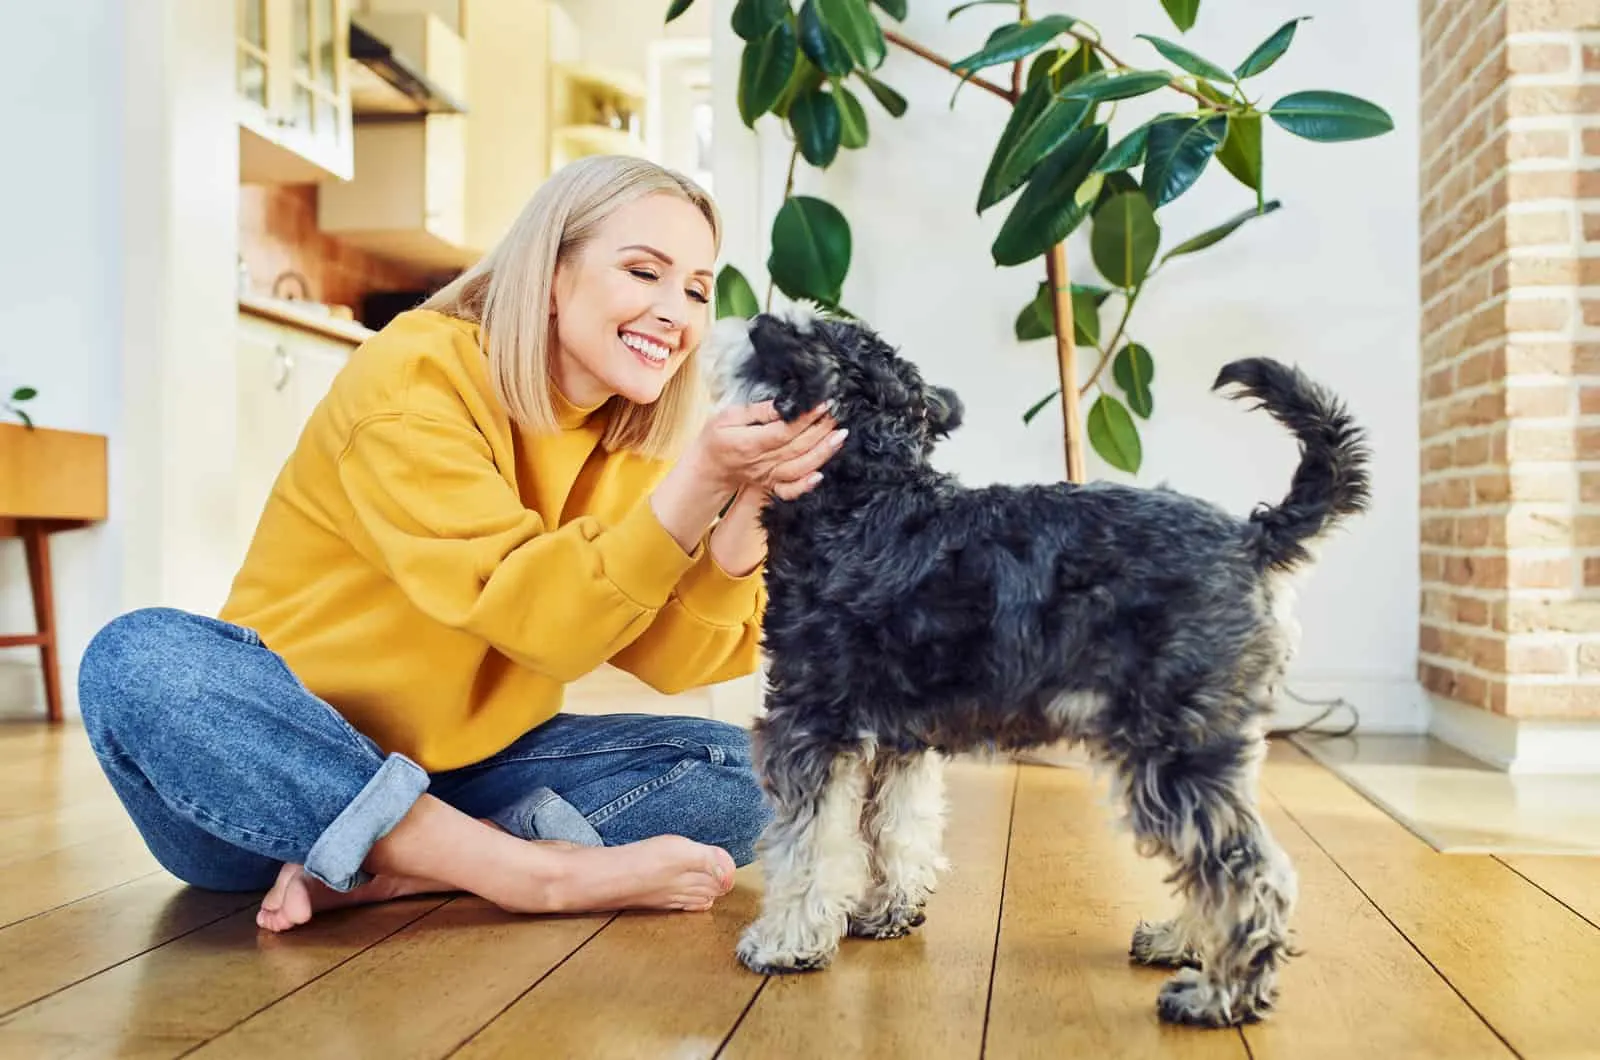 Smiling woman playing with dog at home